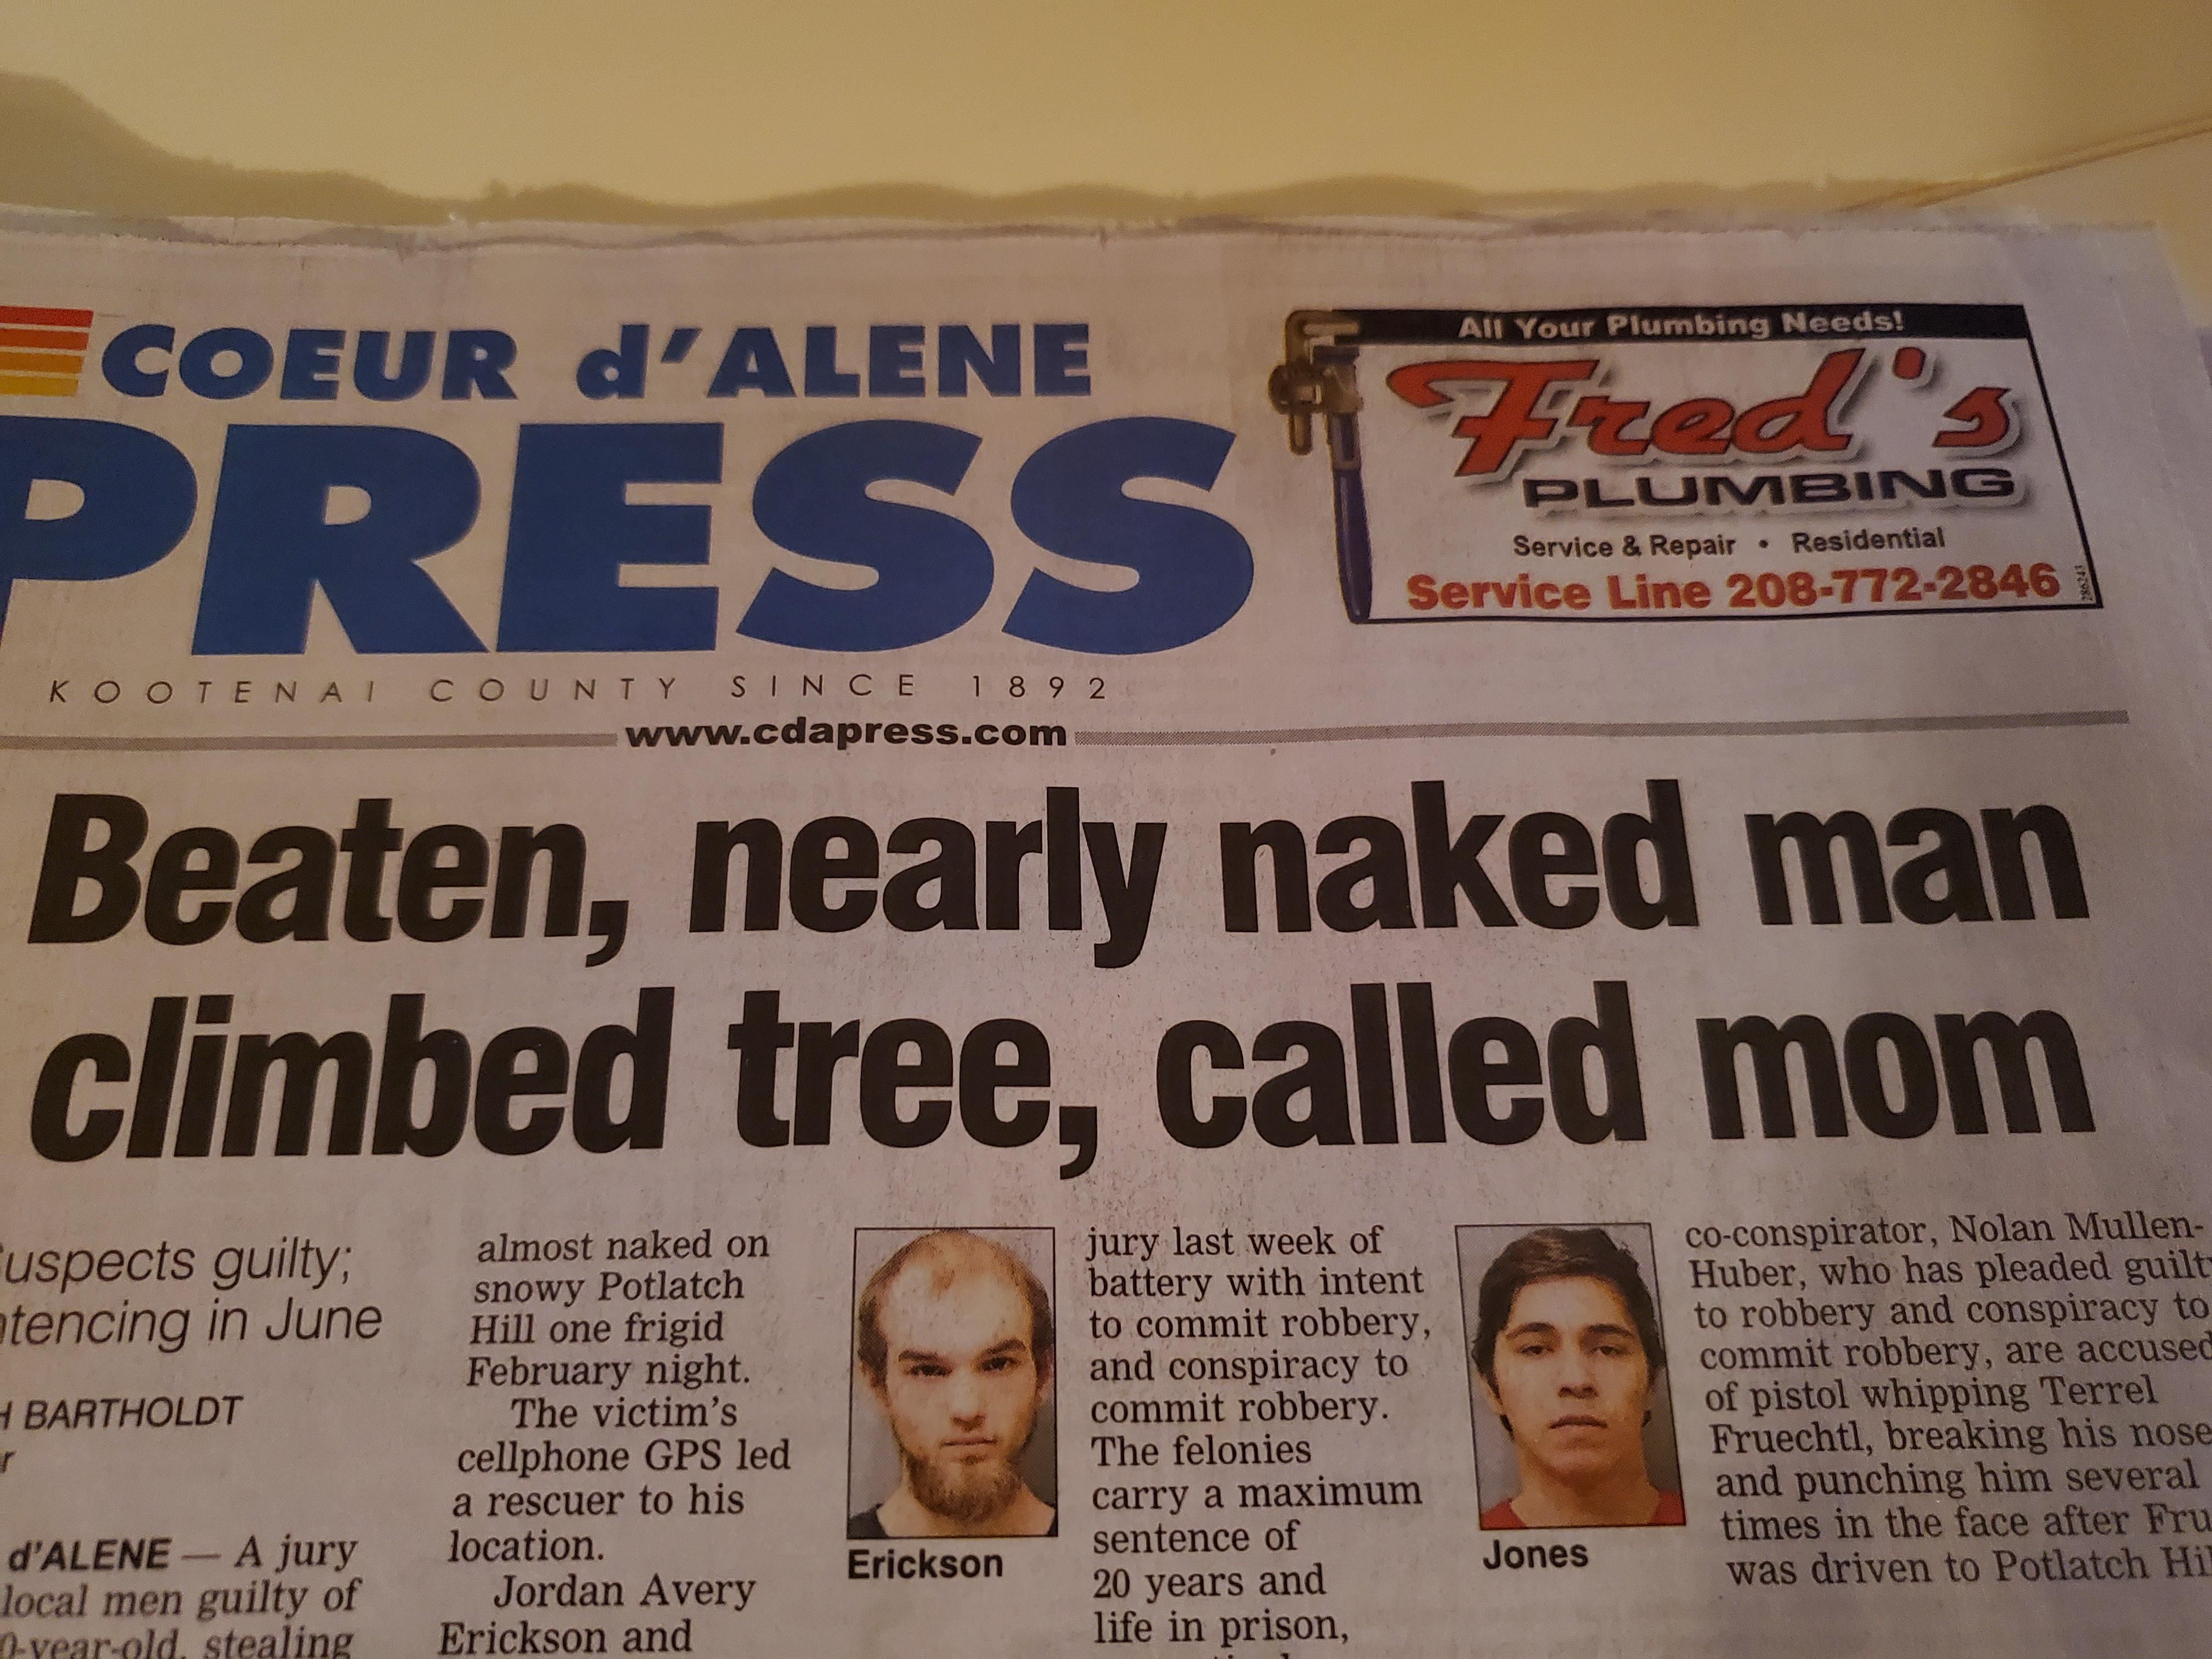 newspaper - All Your Plumbing Needs Eur dALENE Press Plumbing Service & Repair . Residential Service Line 2087722846 Kootena County Since 1892 Beaten, nearly naked man climbed tree, called mom "uspects guilty atencing in June Bartholdt almost naked on sno